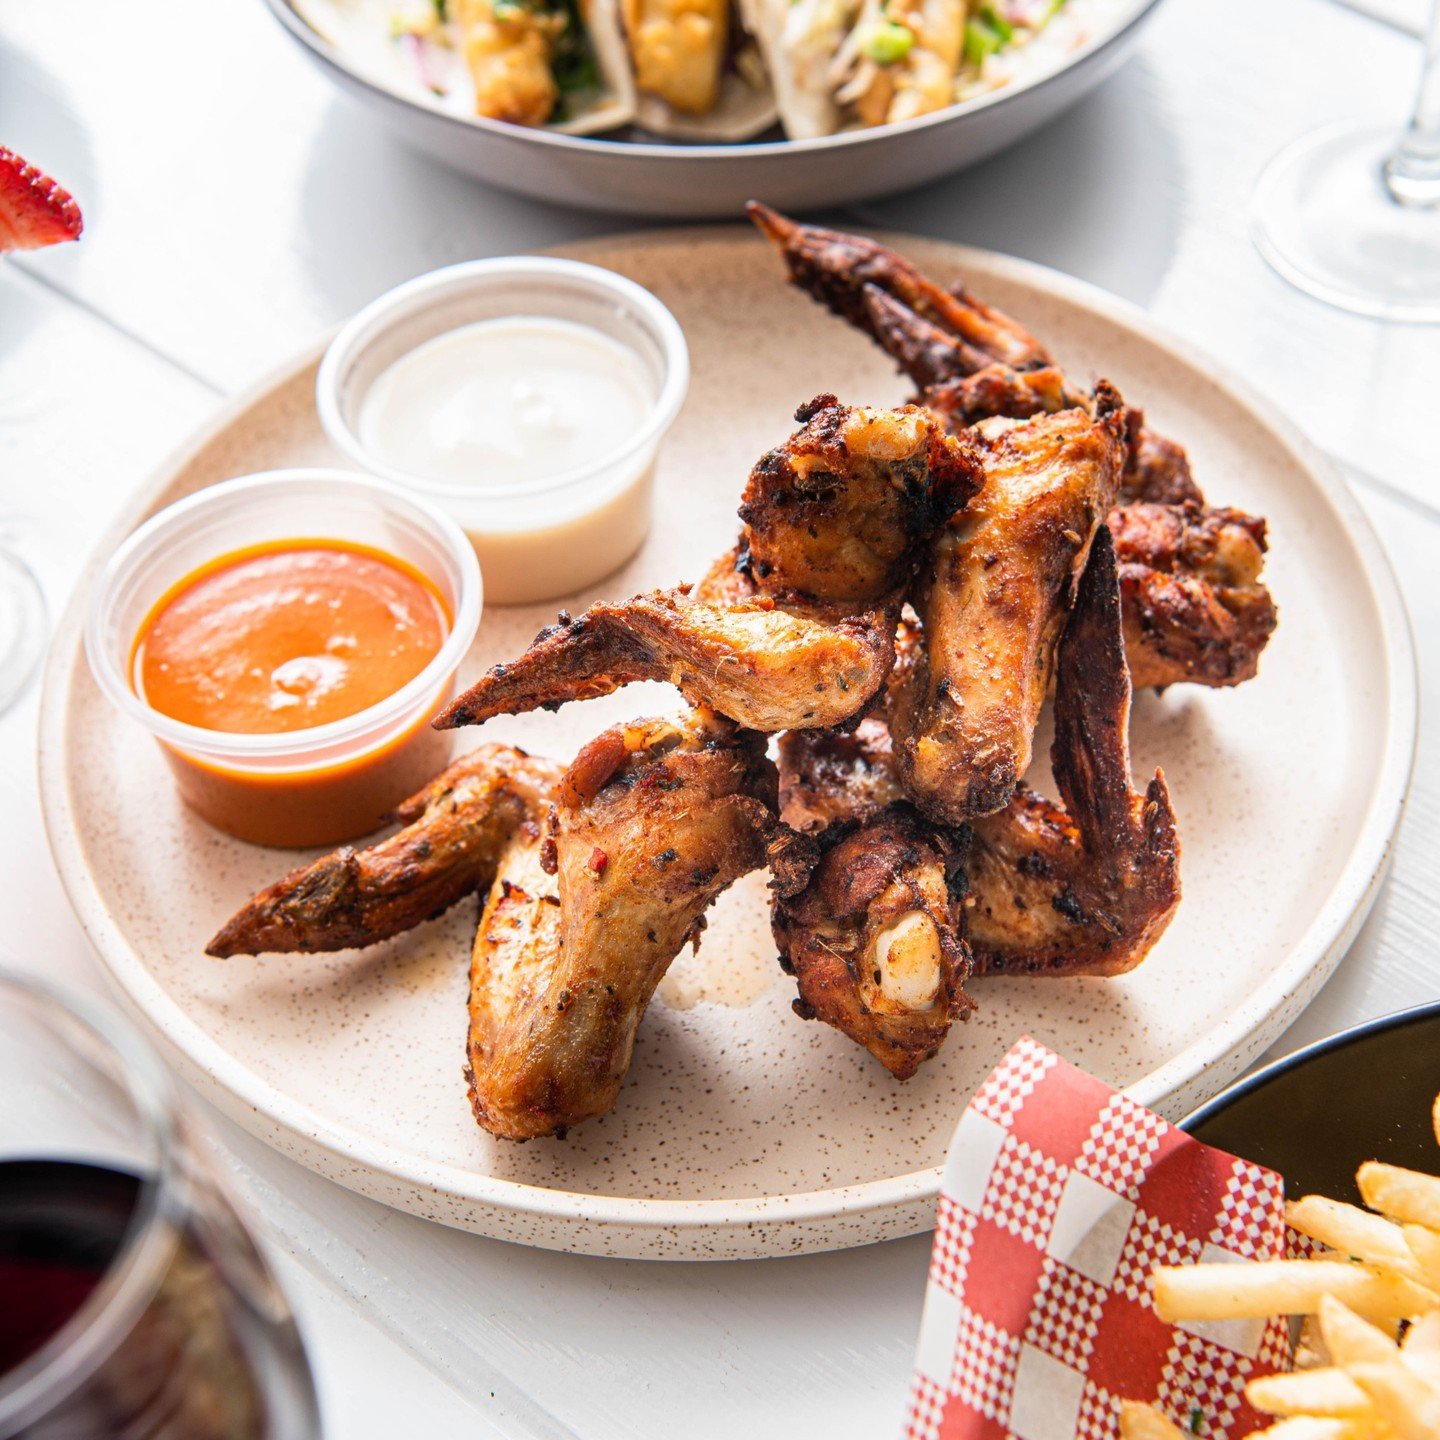 Rejoice! It's Friday and you know what that means! 🍗🍗

Grab some well-deserved after-work feast today. Maybe some chicken wings for starters? 

#delicious #dining #chickenwings #fridays #themillhotel